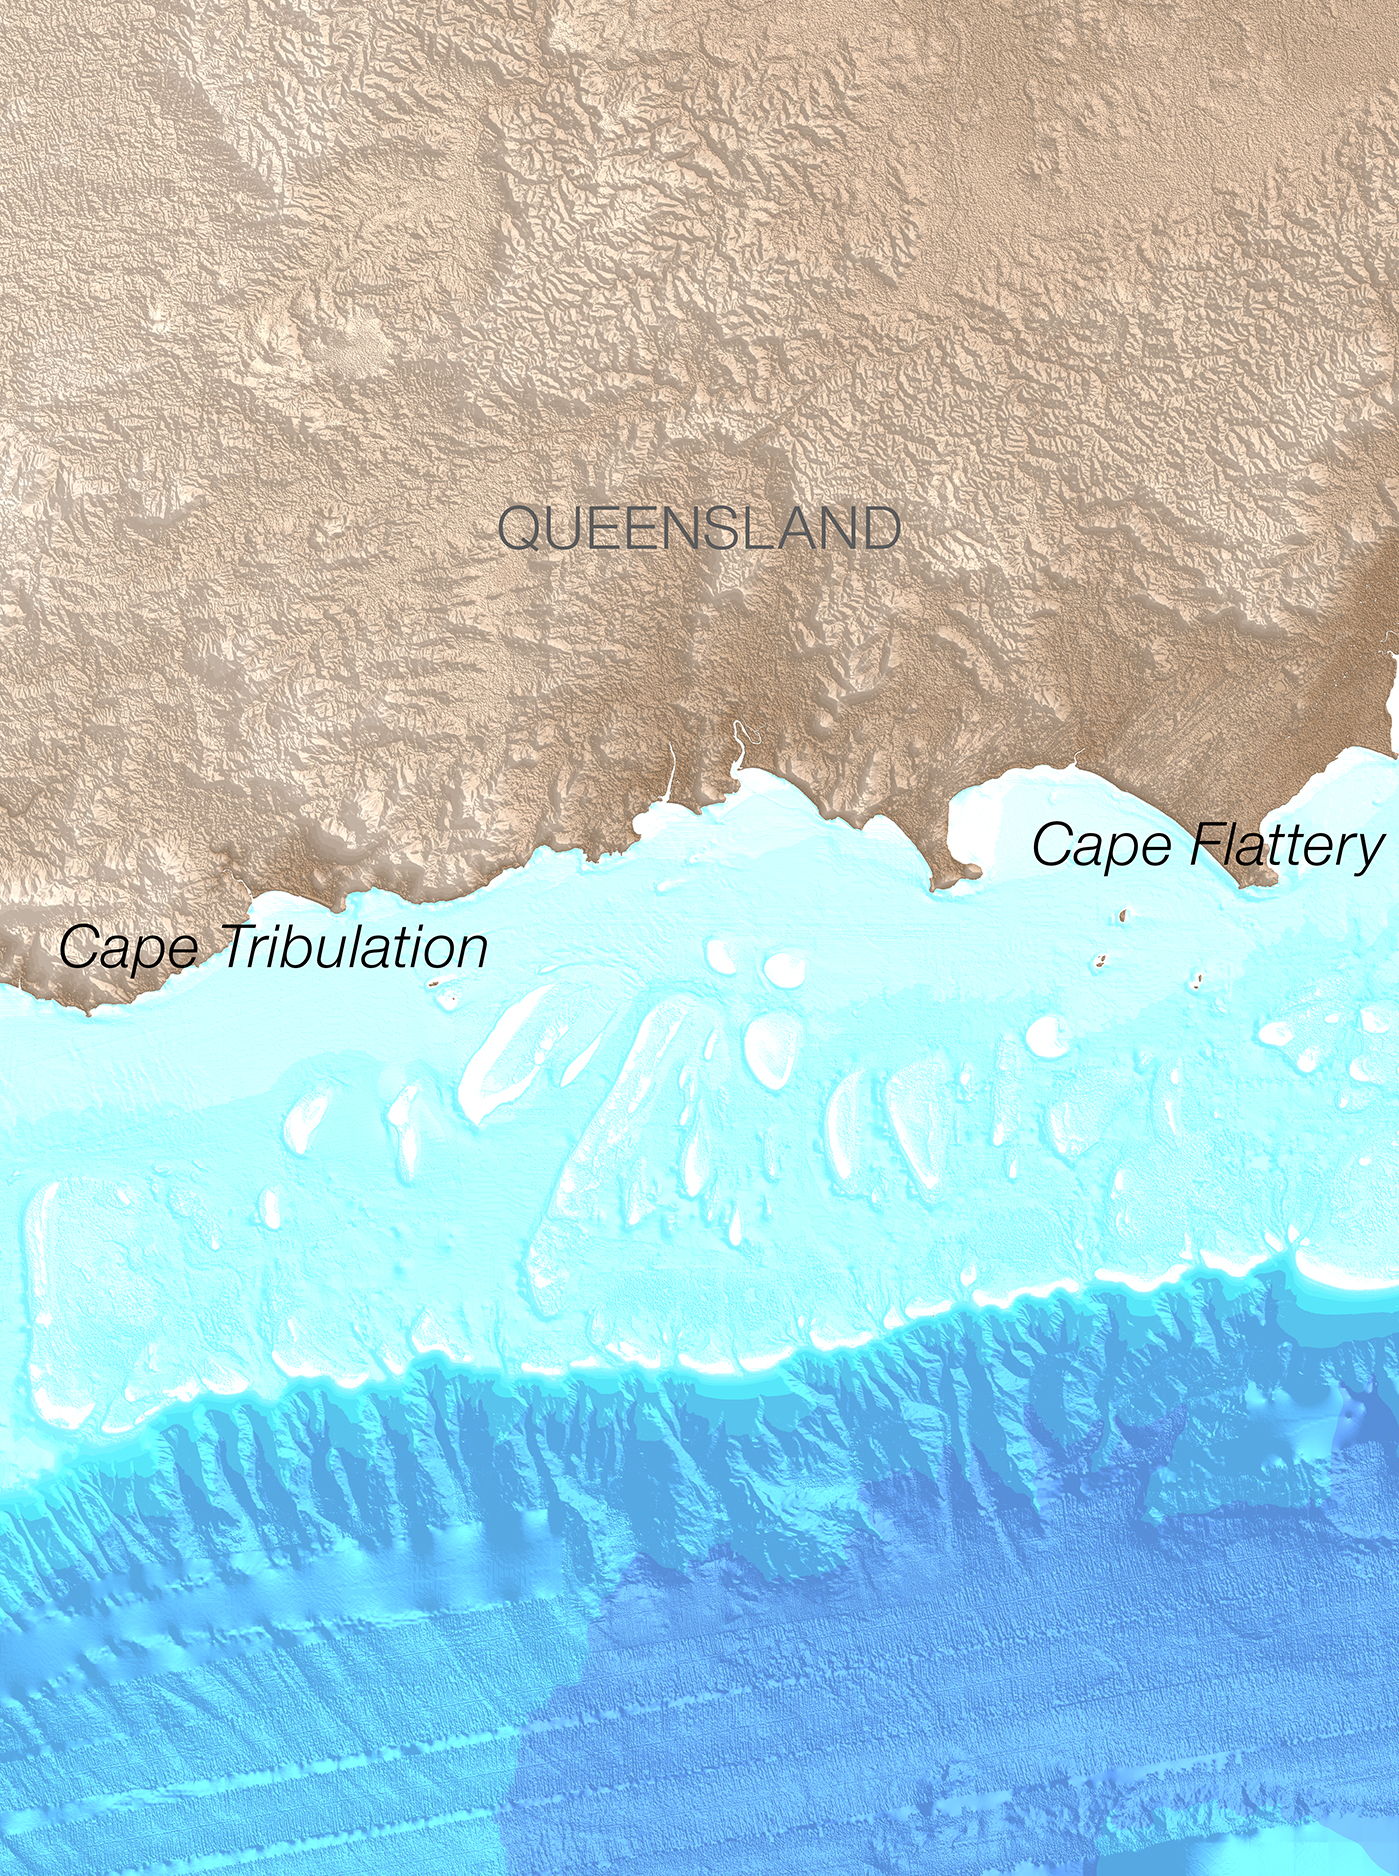 30 m bathymetry data of the Great Barrier Reef, from Cape Tribulation to Cape Flattery